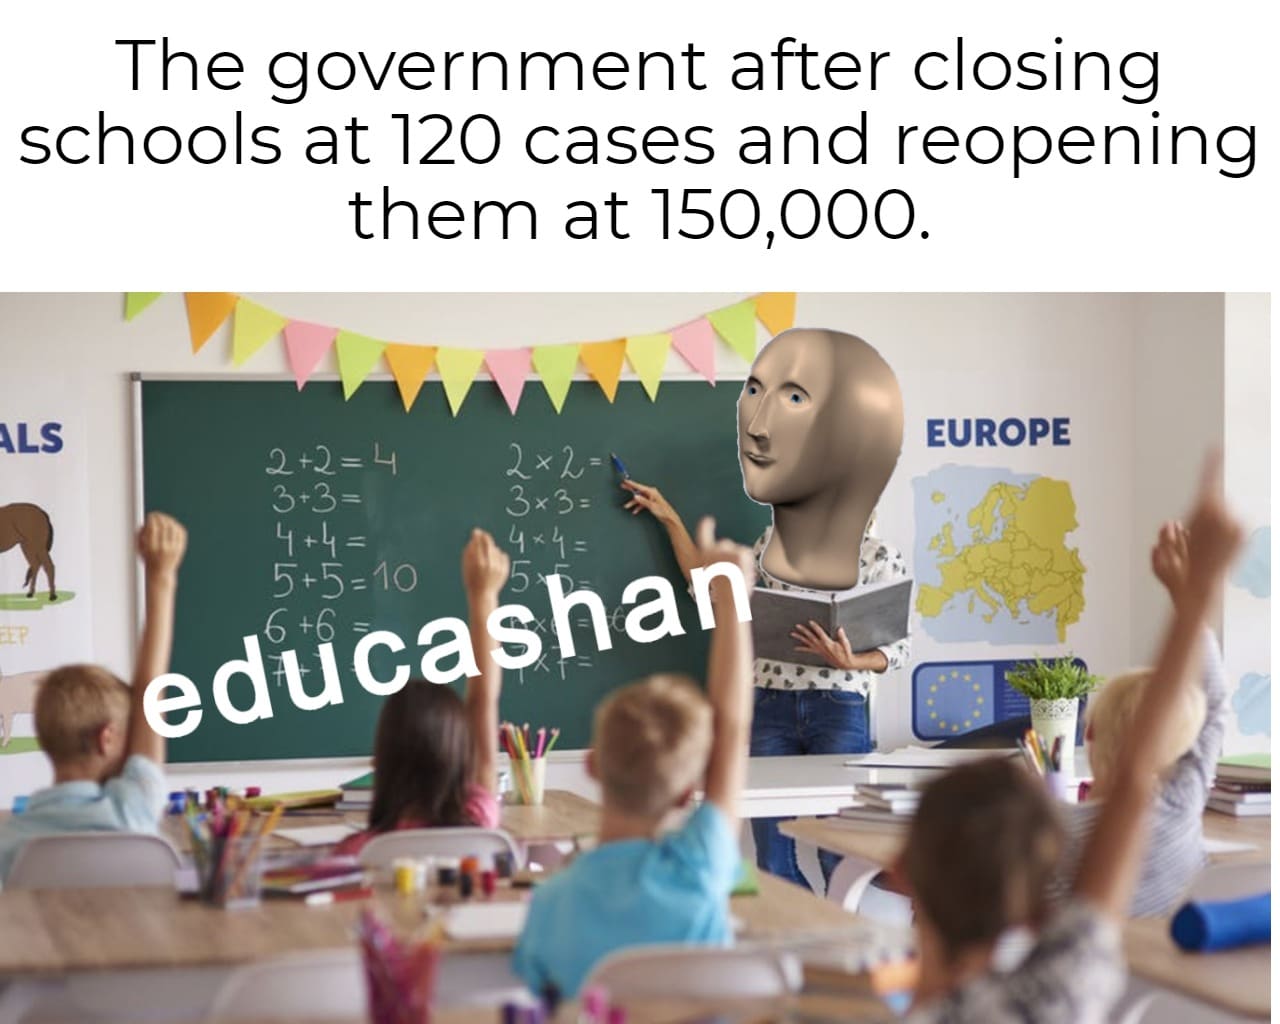 Dank, Europe, India, Germany, America, September Dank Memes Dank, Europe, India, Germany, America, September text: The government after closing schools at 120 cases and reopening them at 150,000. EUROPE duca ha 